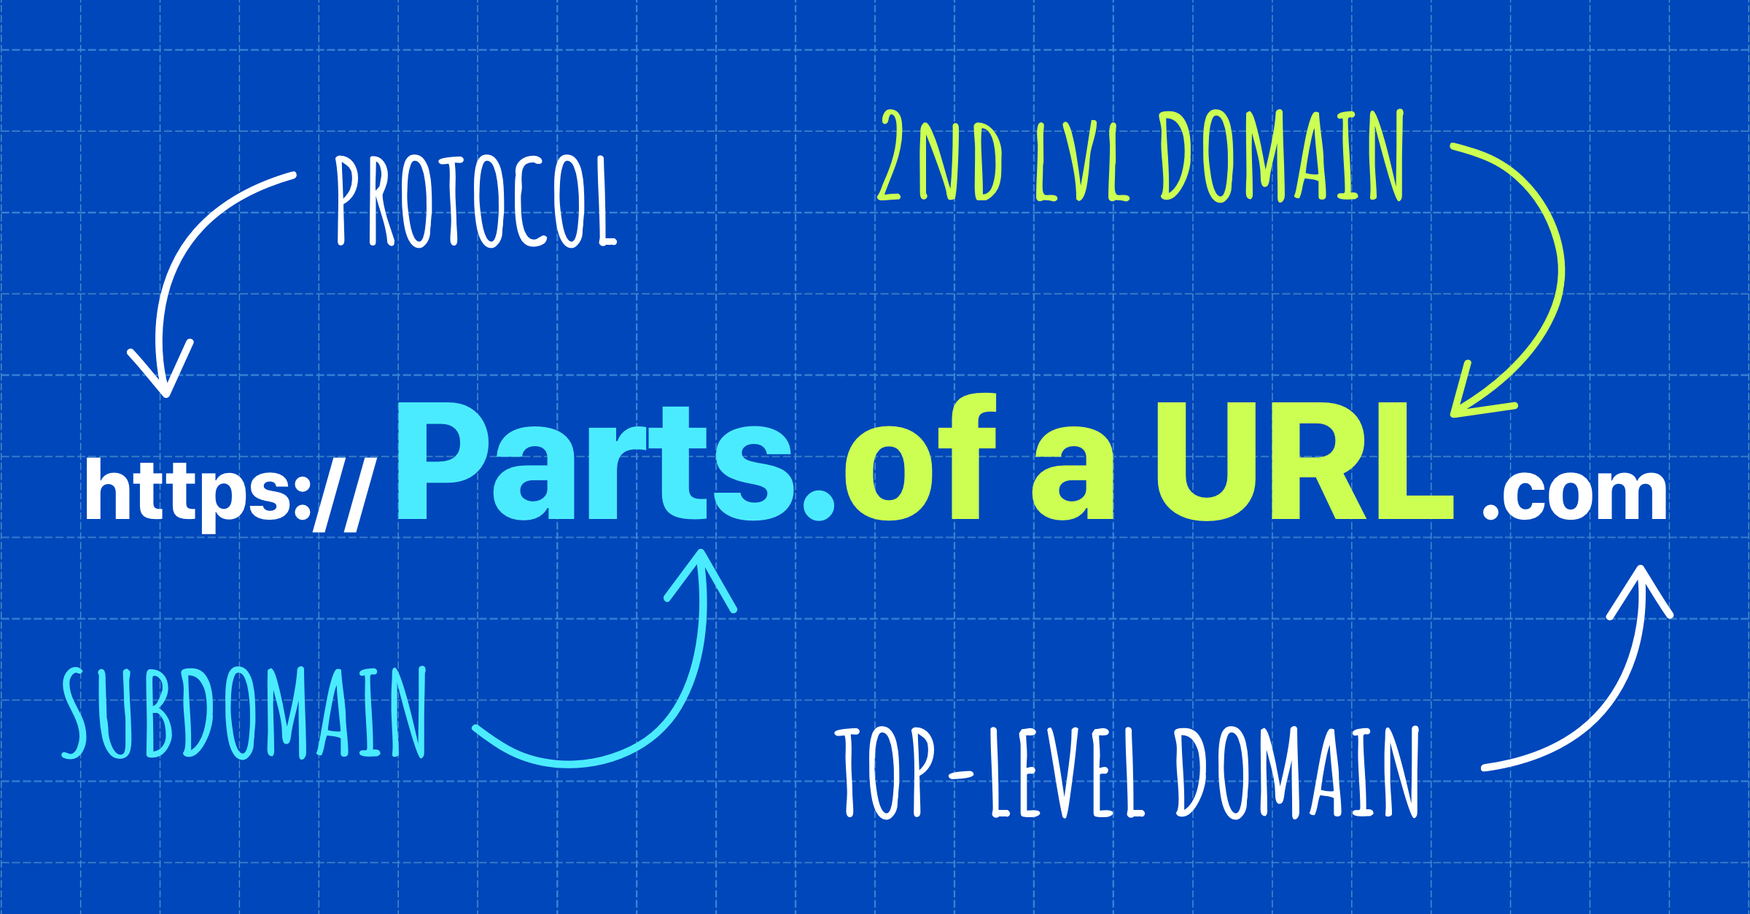 What are the different parts of a URL?